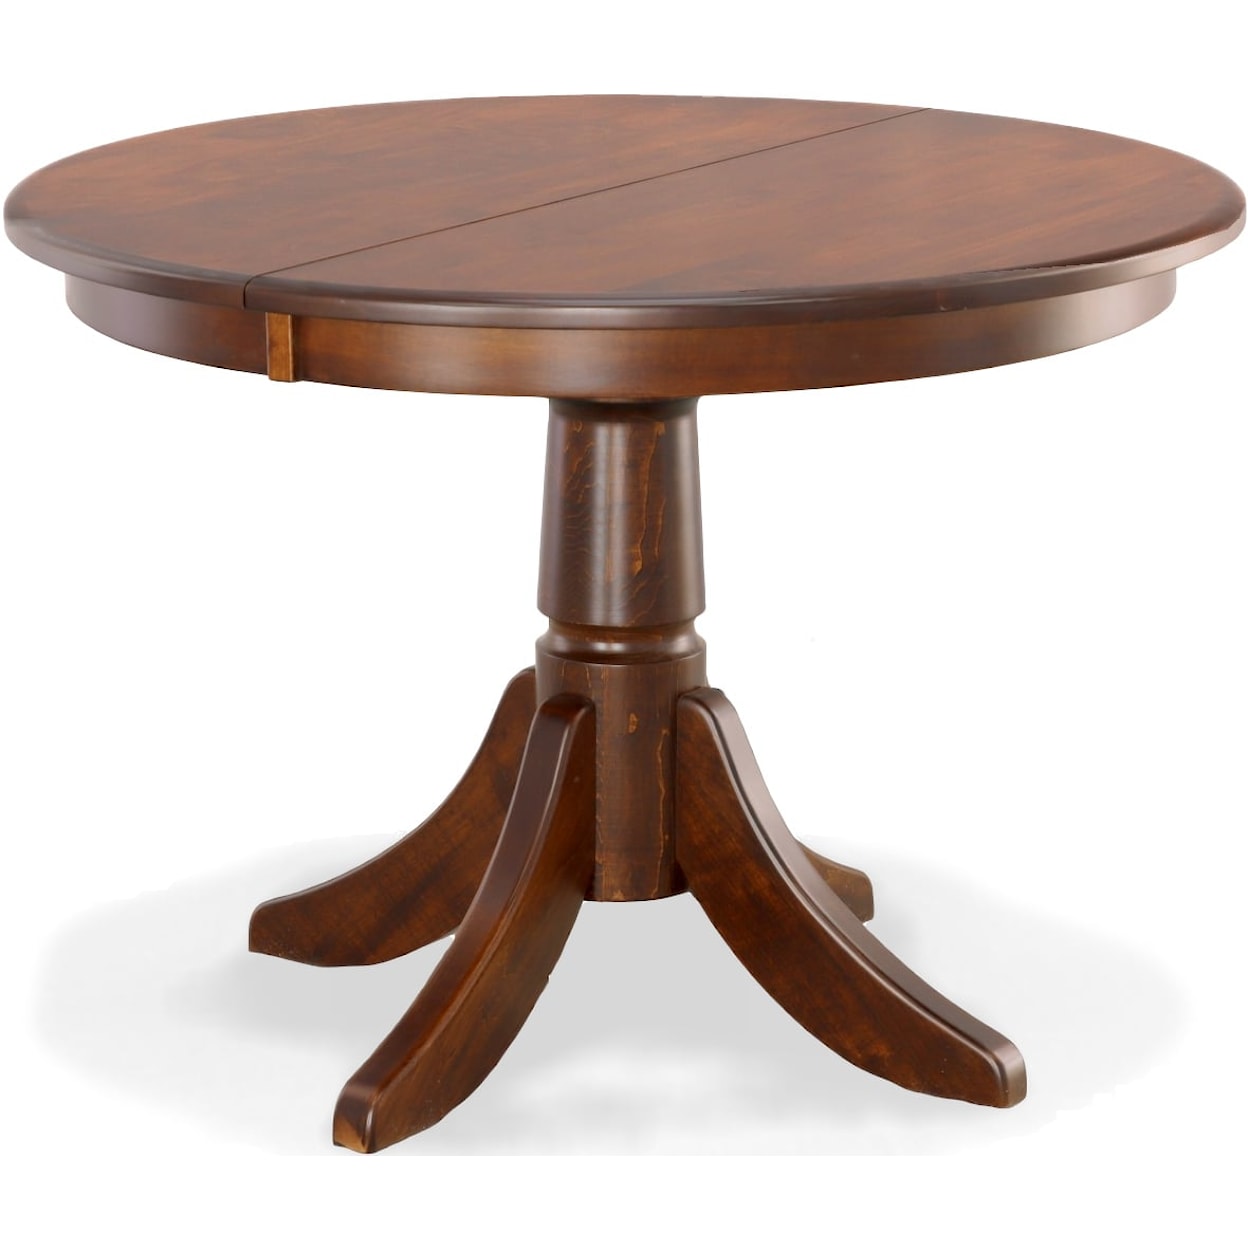 Archbold Furniture Amish Essentials Casual Dining Ruby 42" Round Dining Table